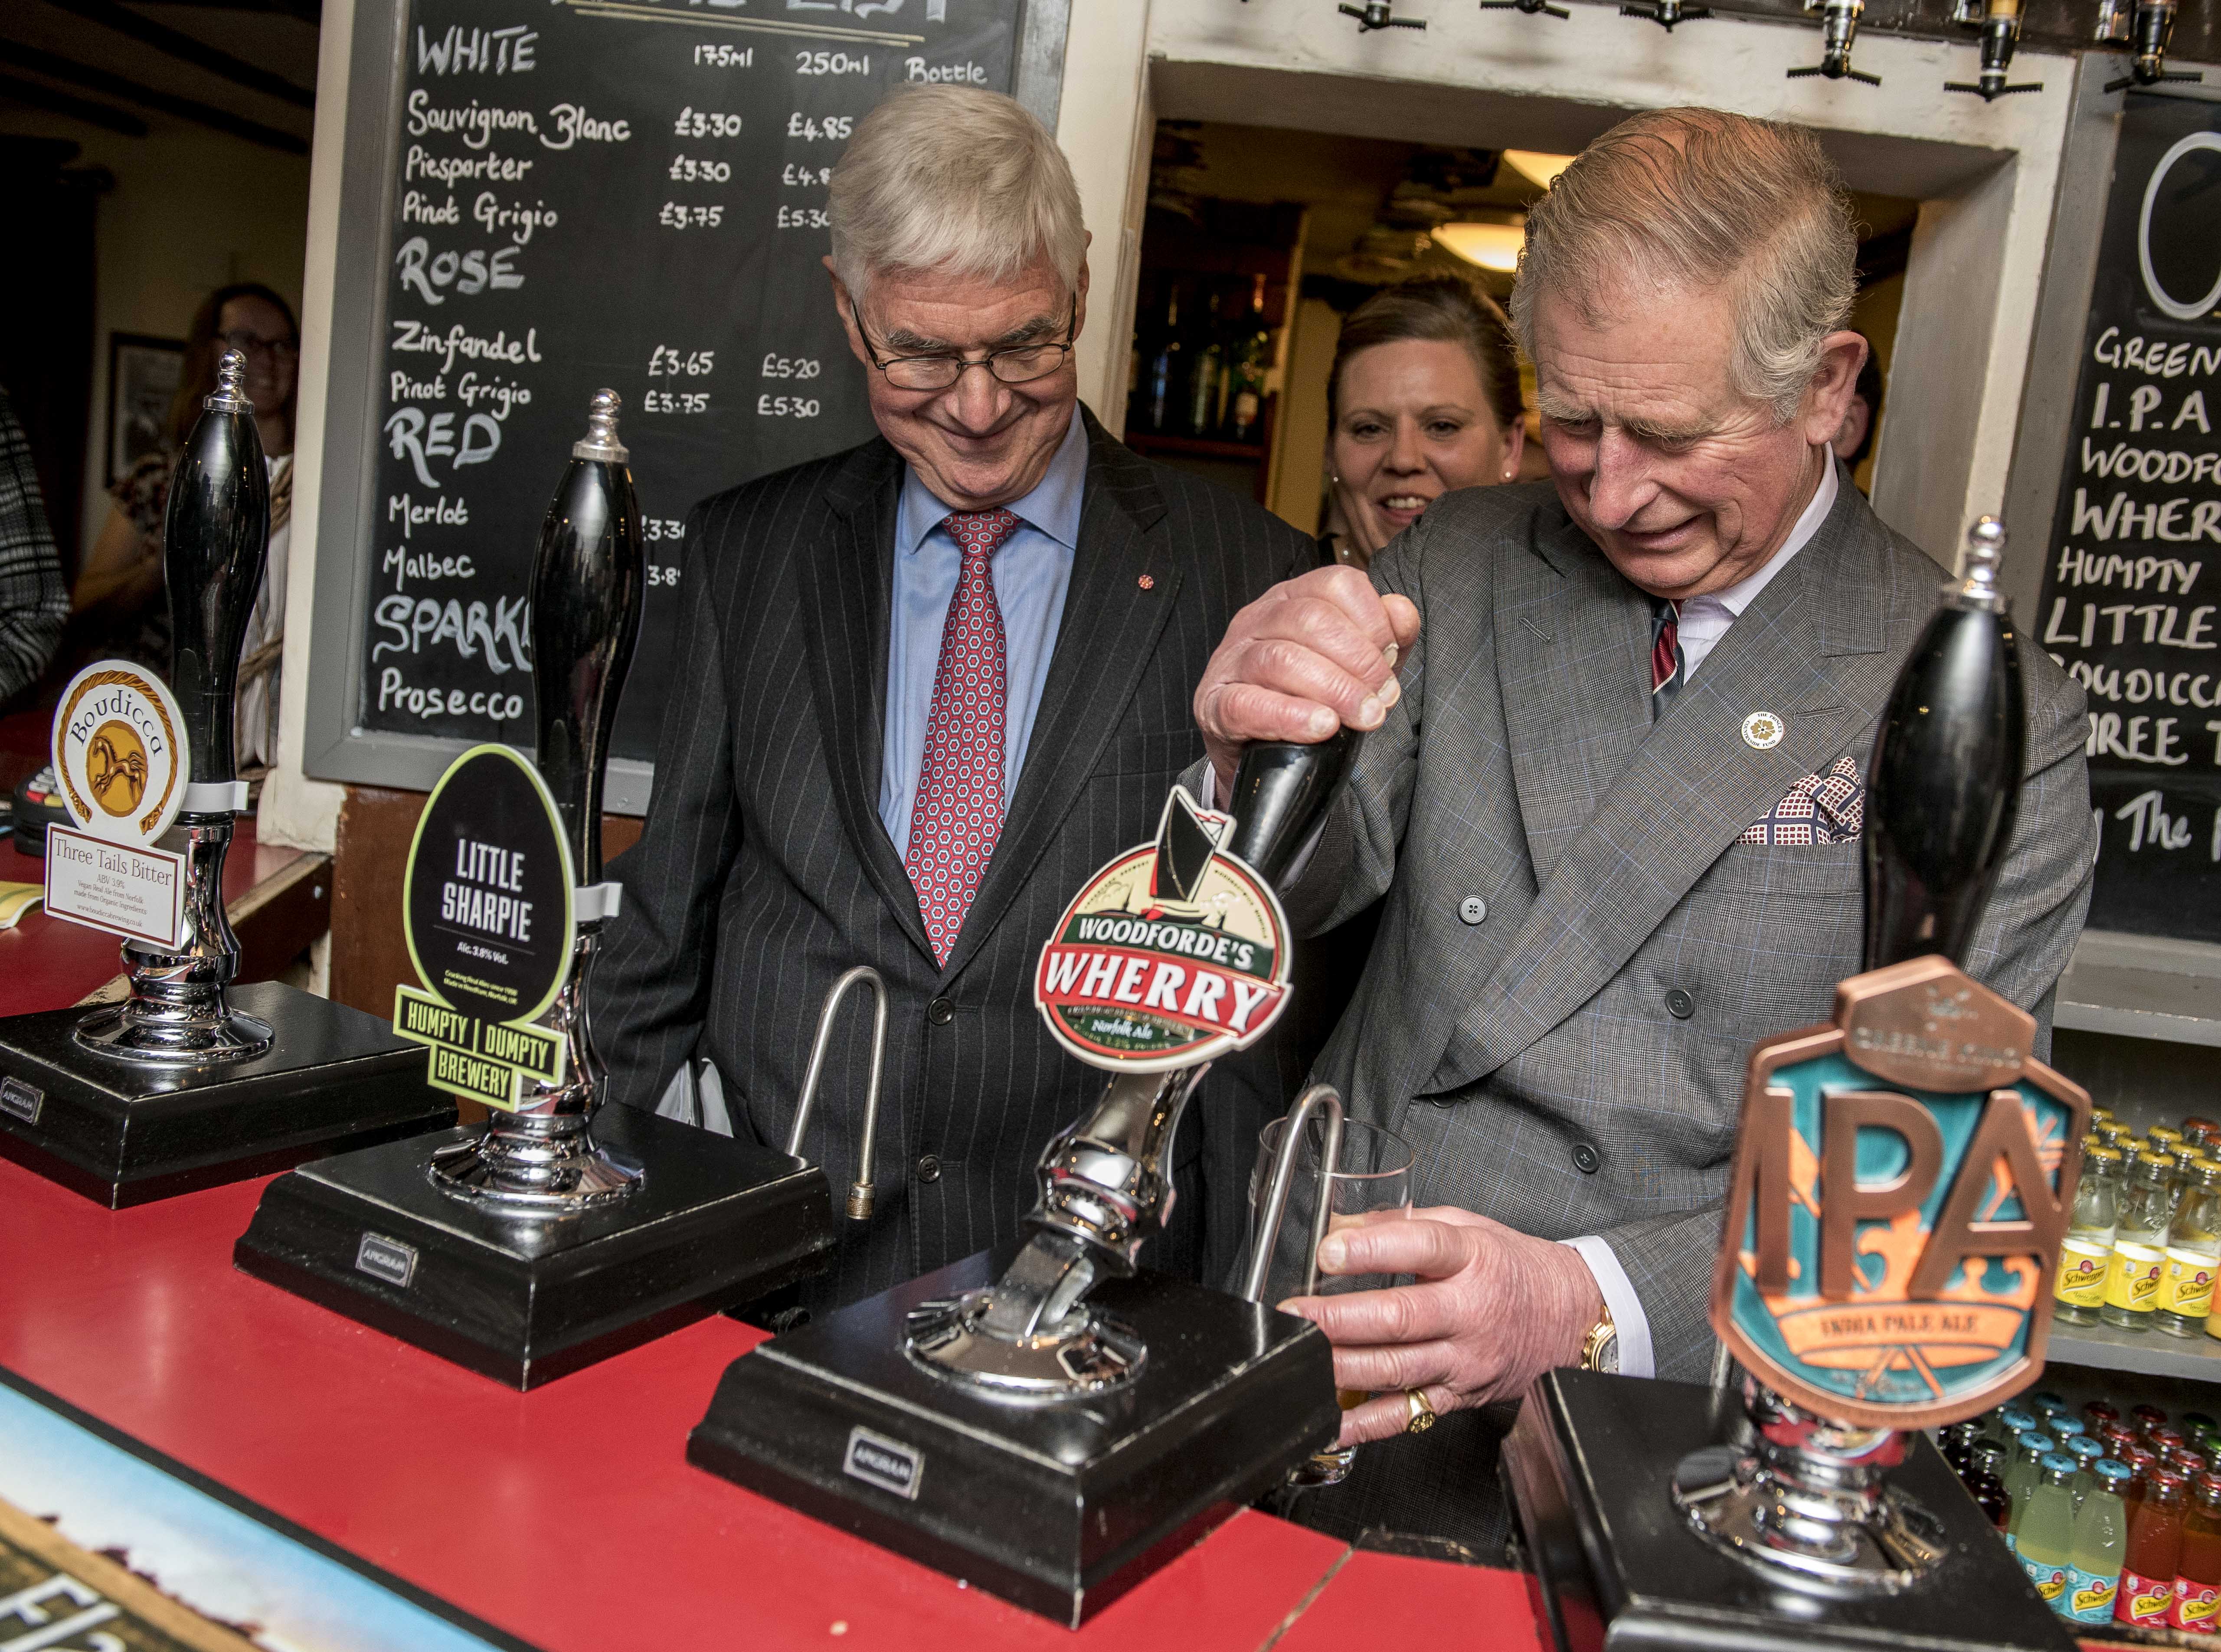 King Charles with a pint of Woodforde's Wherry